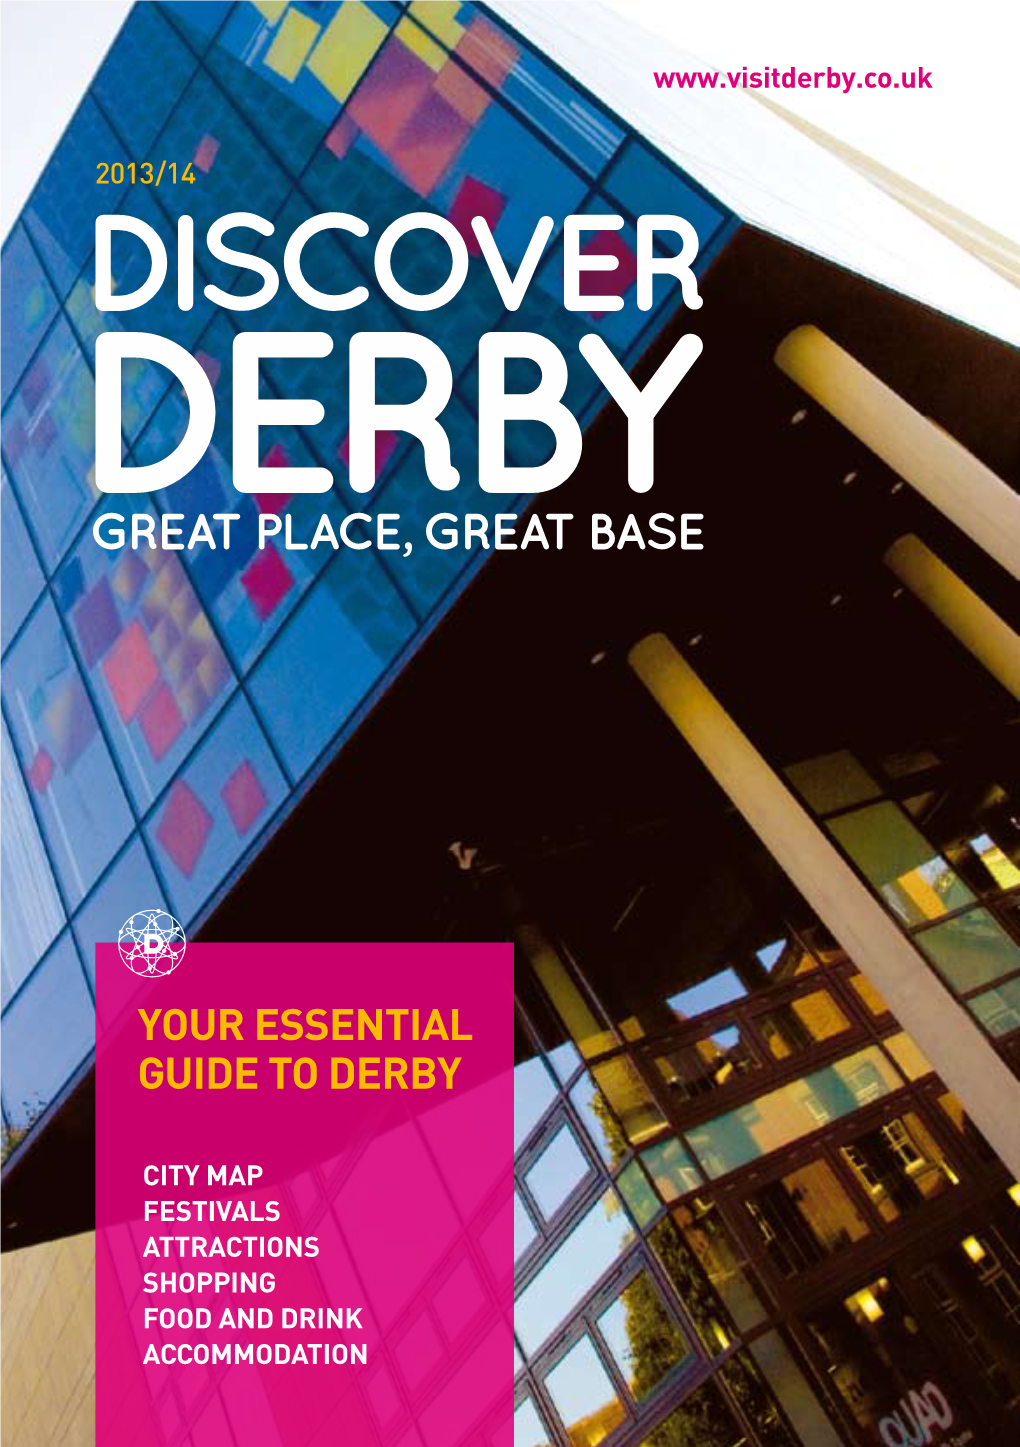 Your Essential Guide to Derby